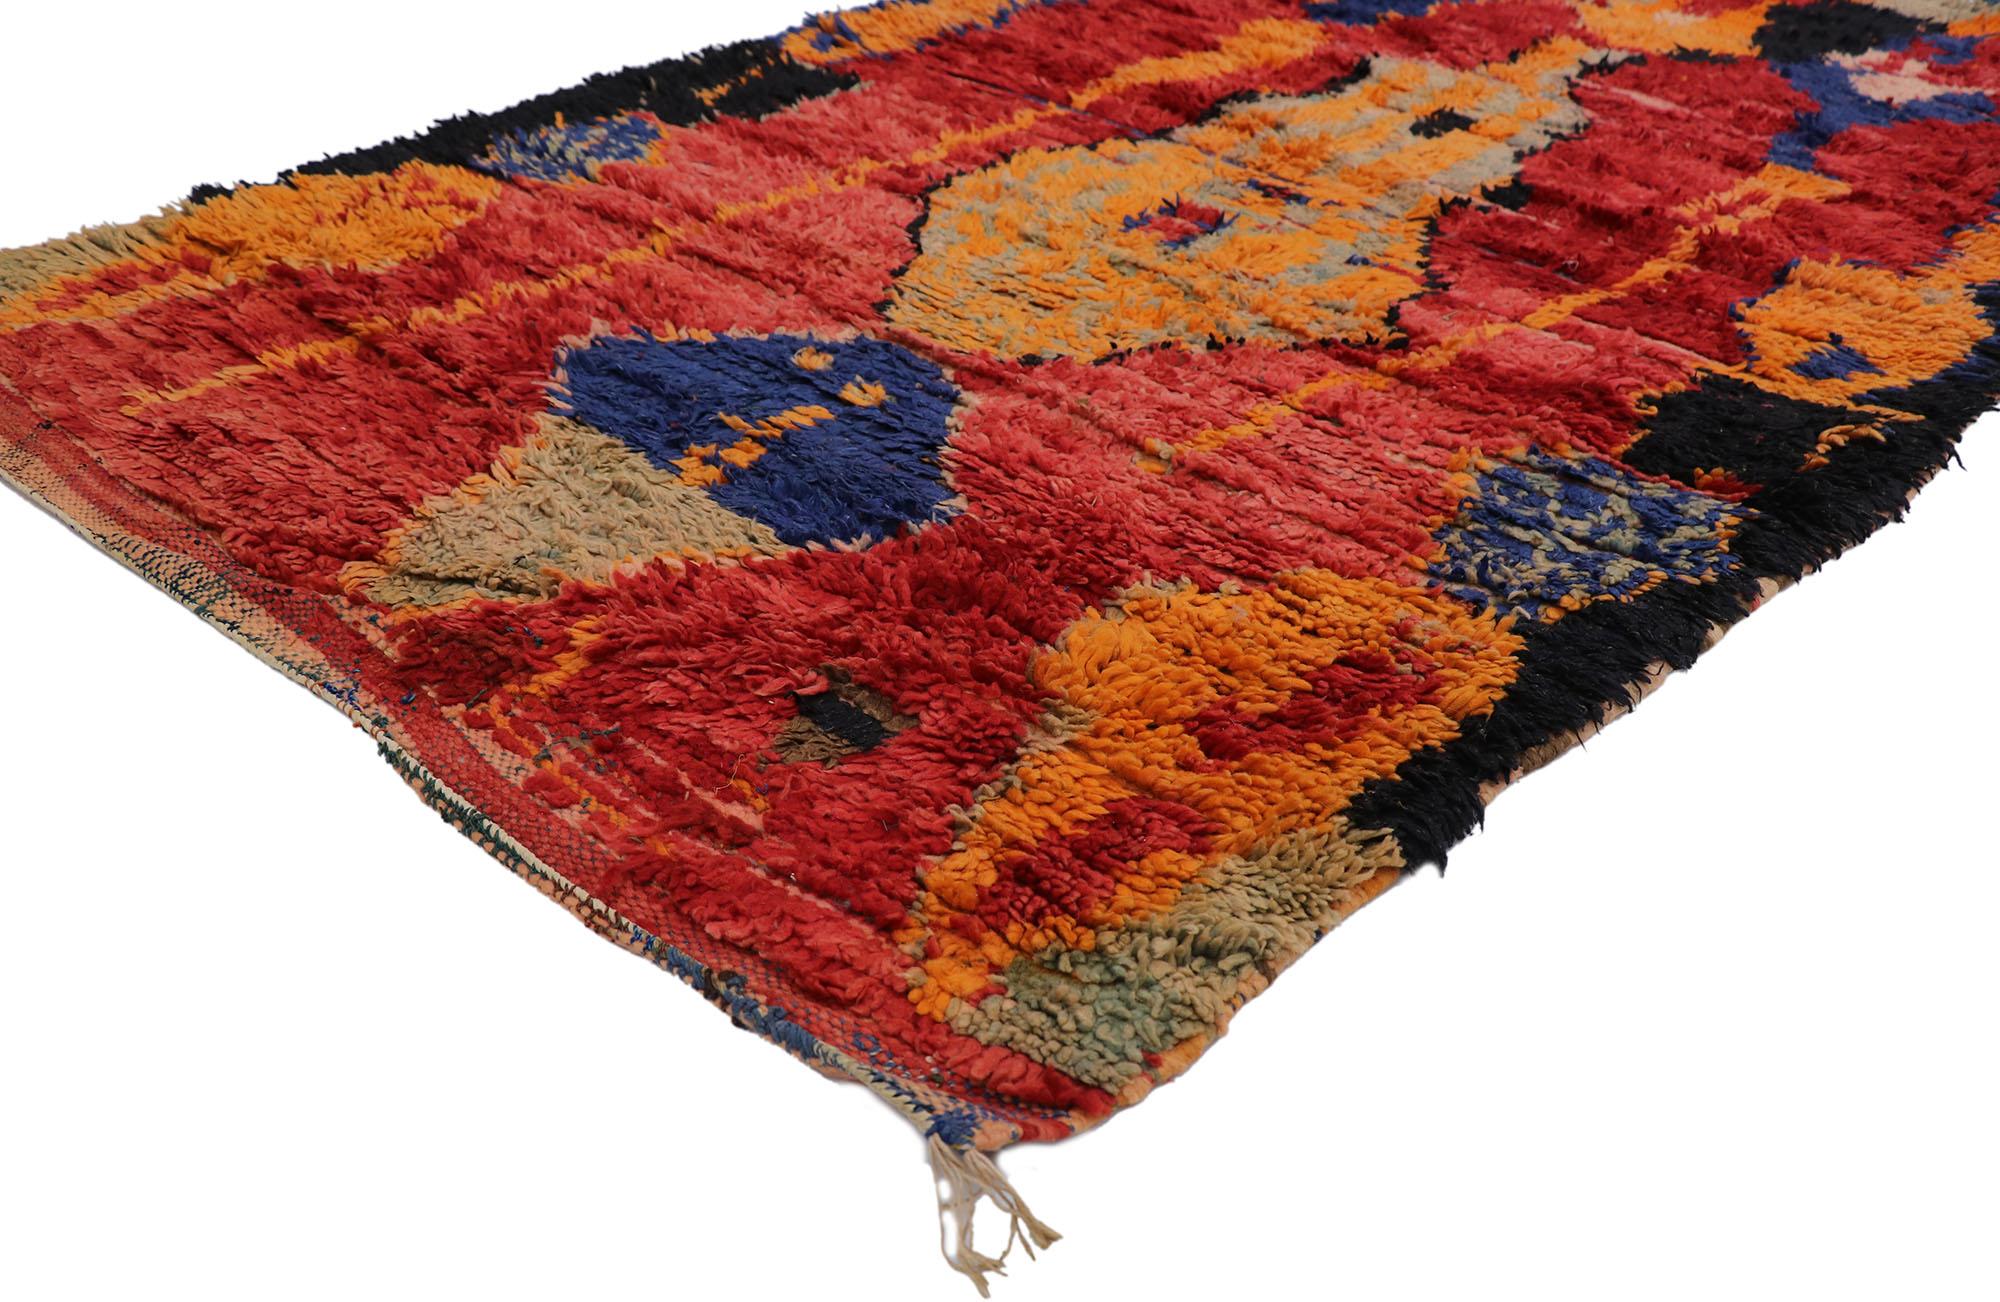 21300 Vintage Berber Ait Bou Ichaouen Moroccan rug with Tribal Style 04'04 x 07'07. Showcasing a bold expressive design, incredible detail and texture, this hand knotted wool vintage Berber Ait Bou Ichaouen Moroccan rug is a captivating vision of